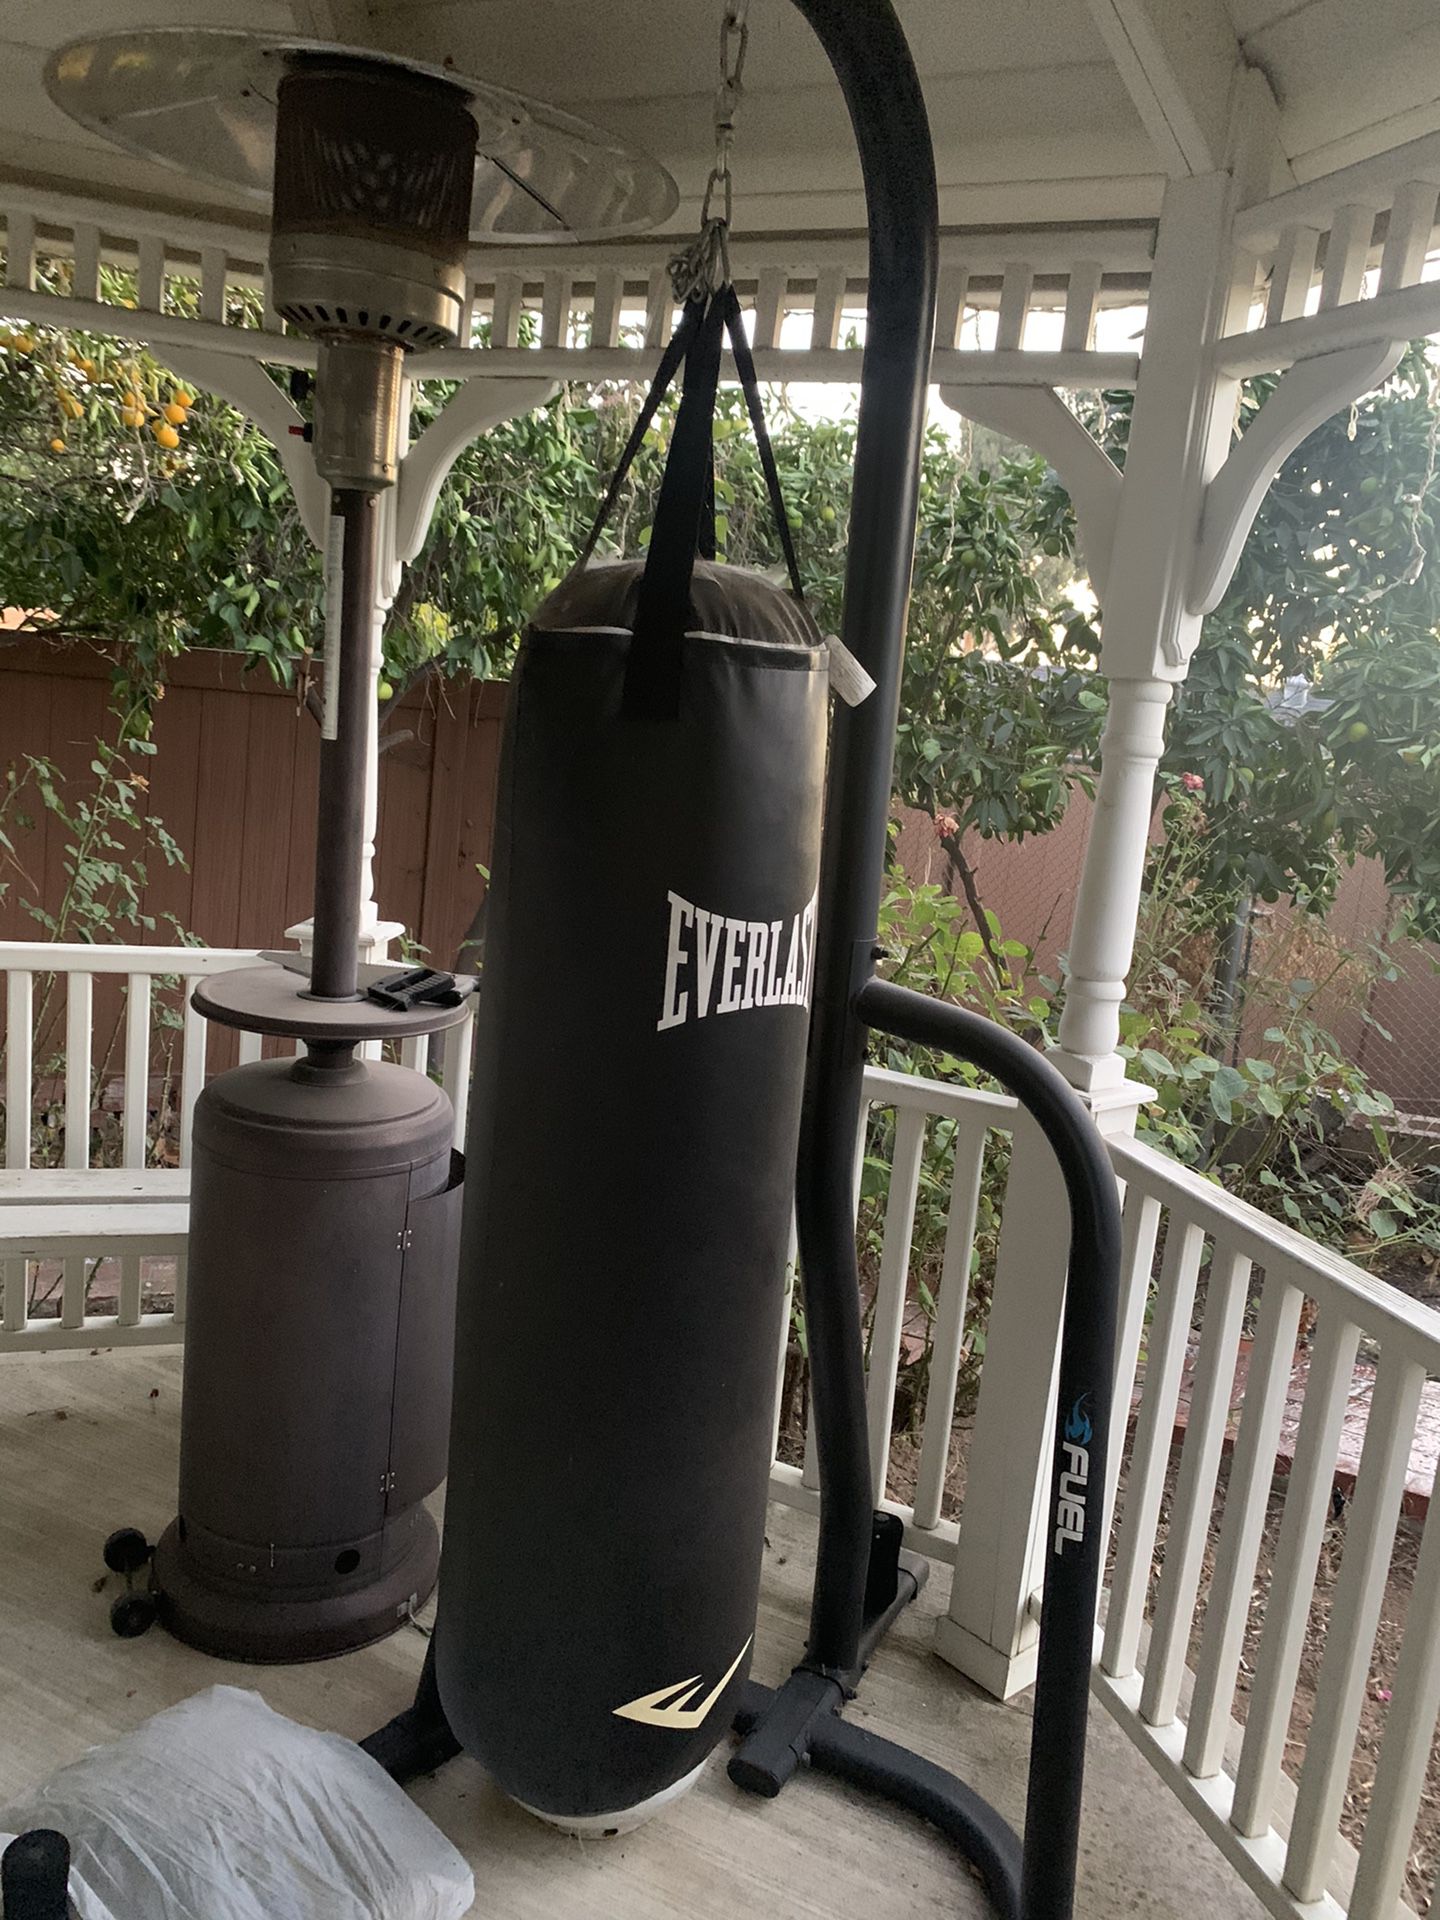 Everlast punching bag and stand.